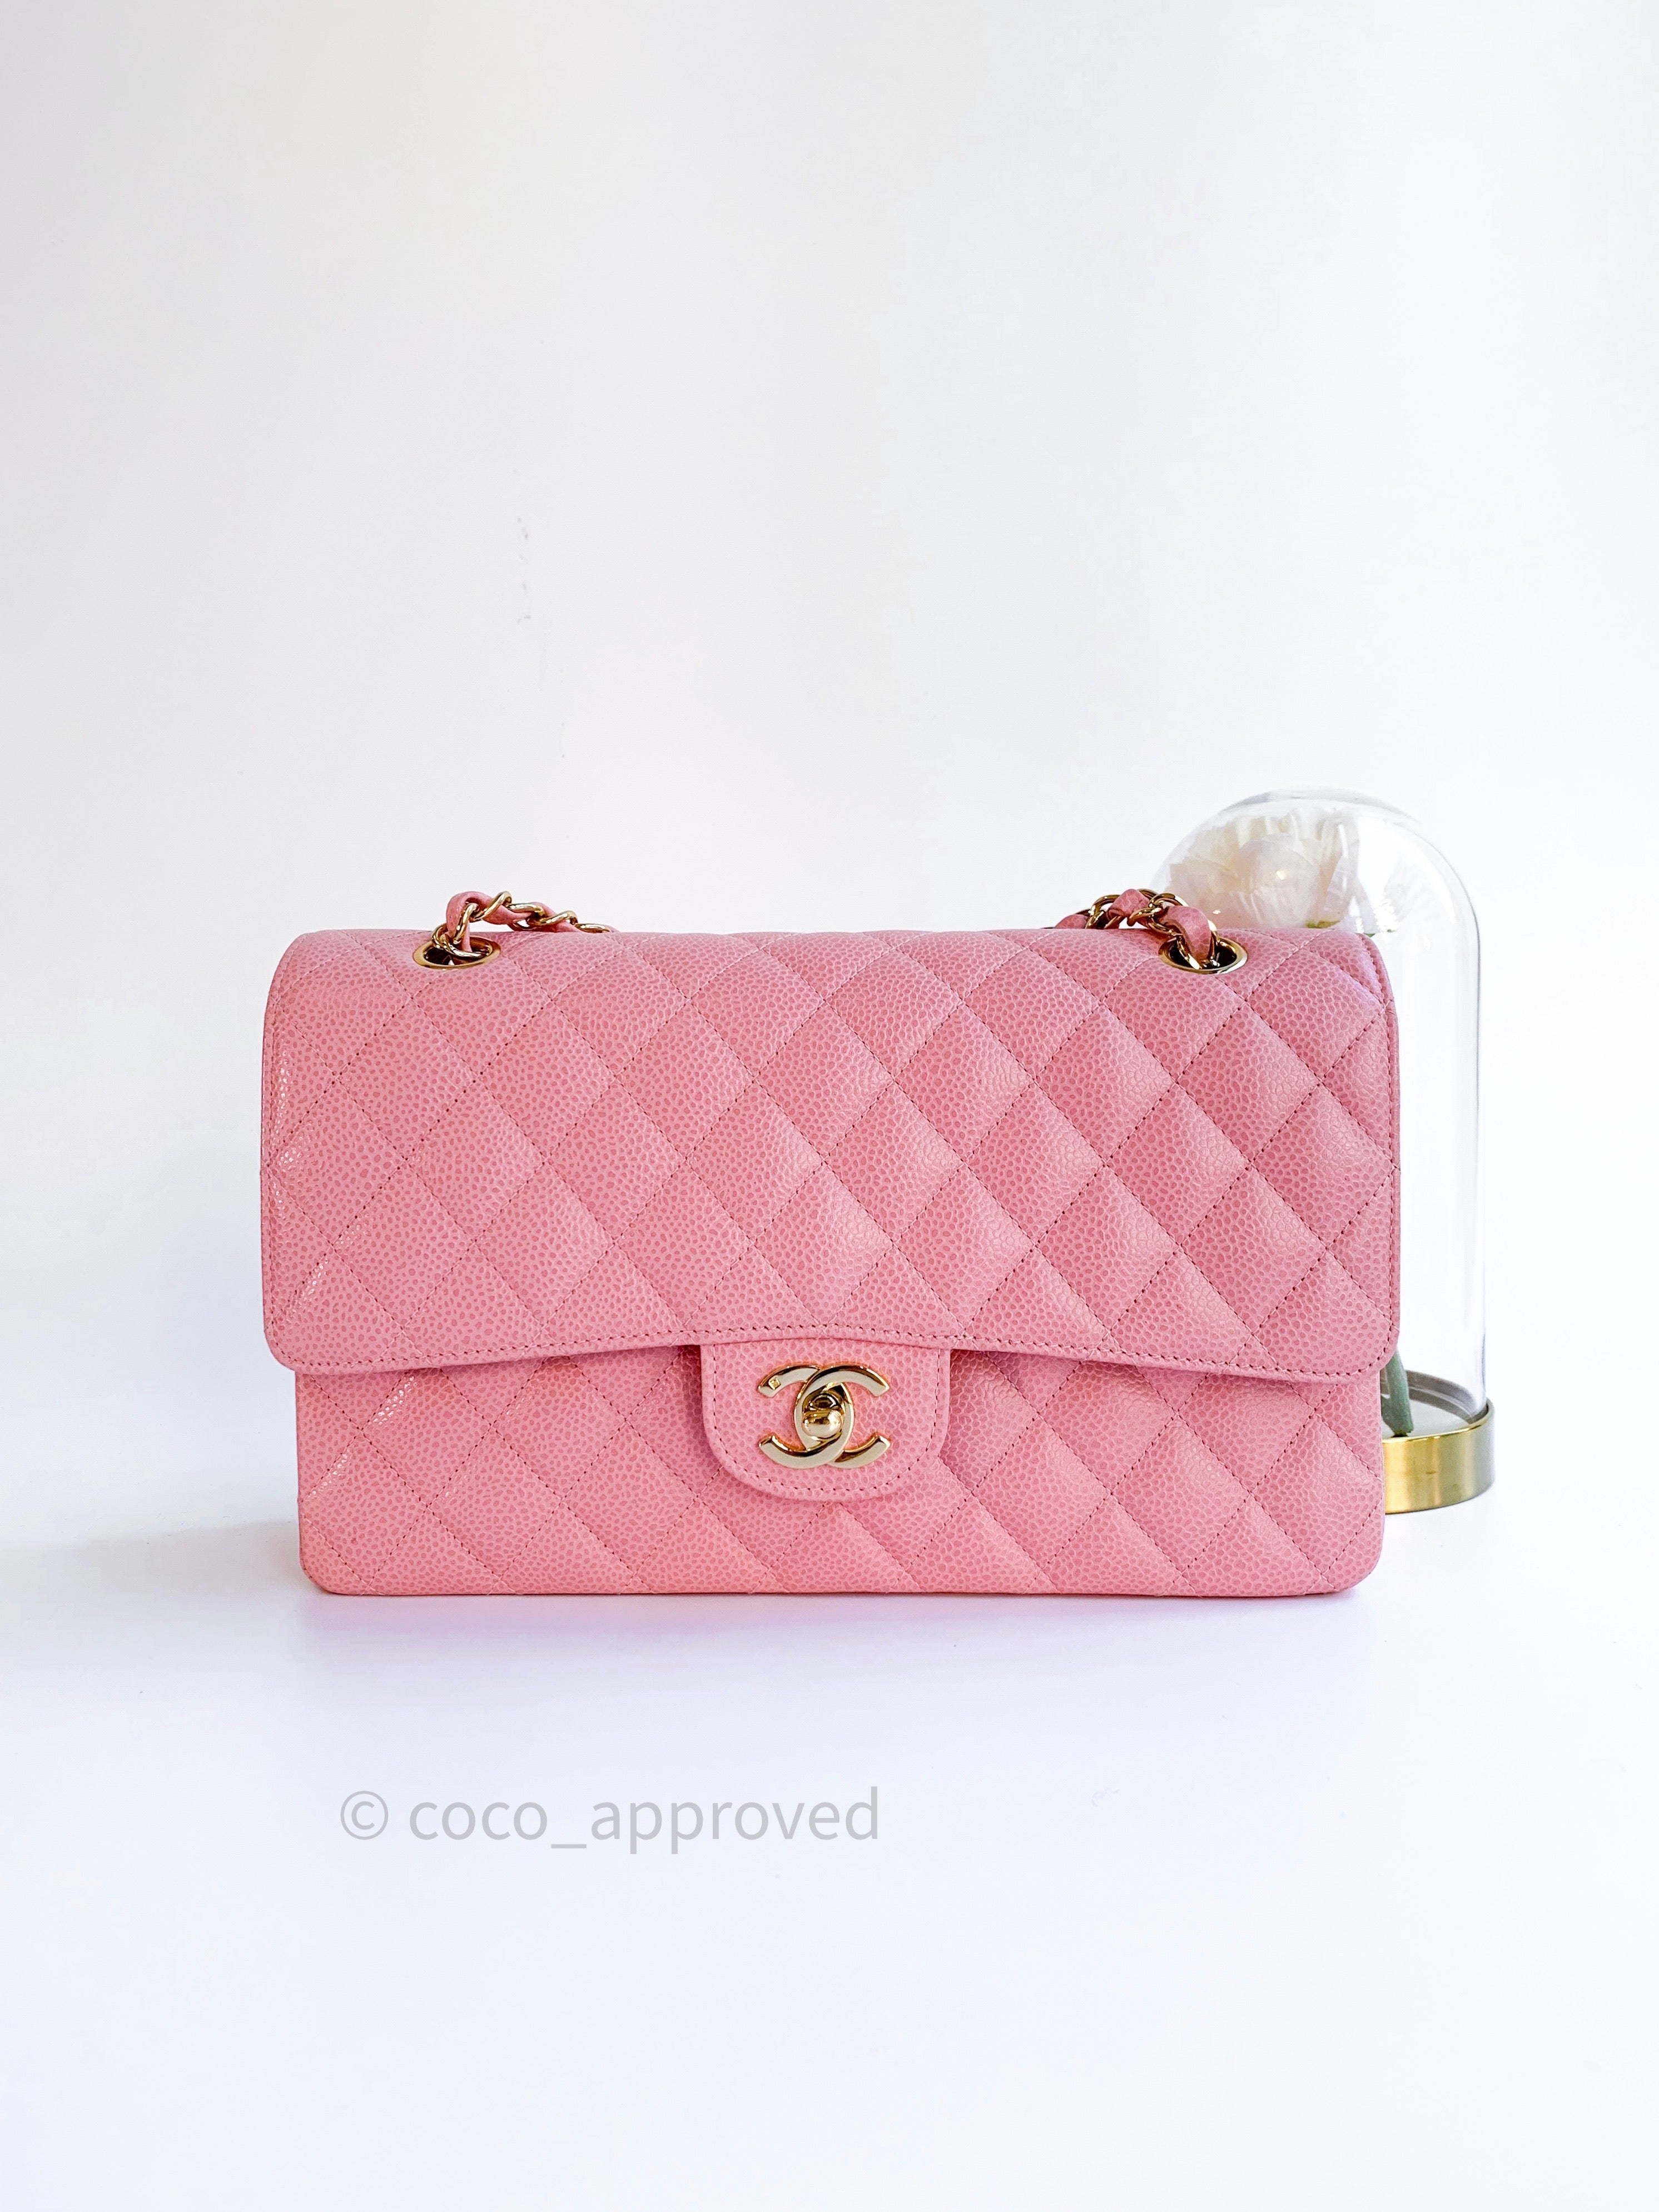 classic pink chanel bag